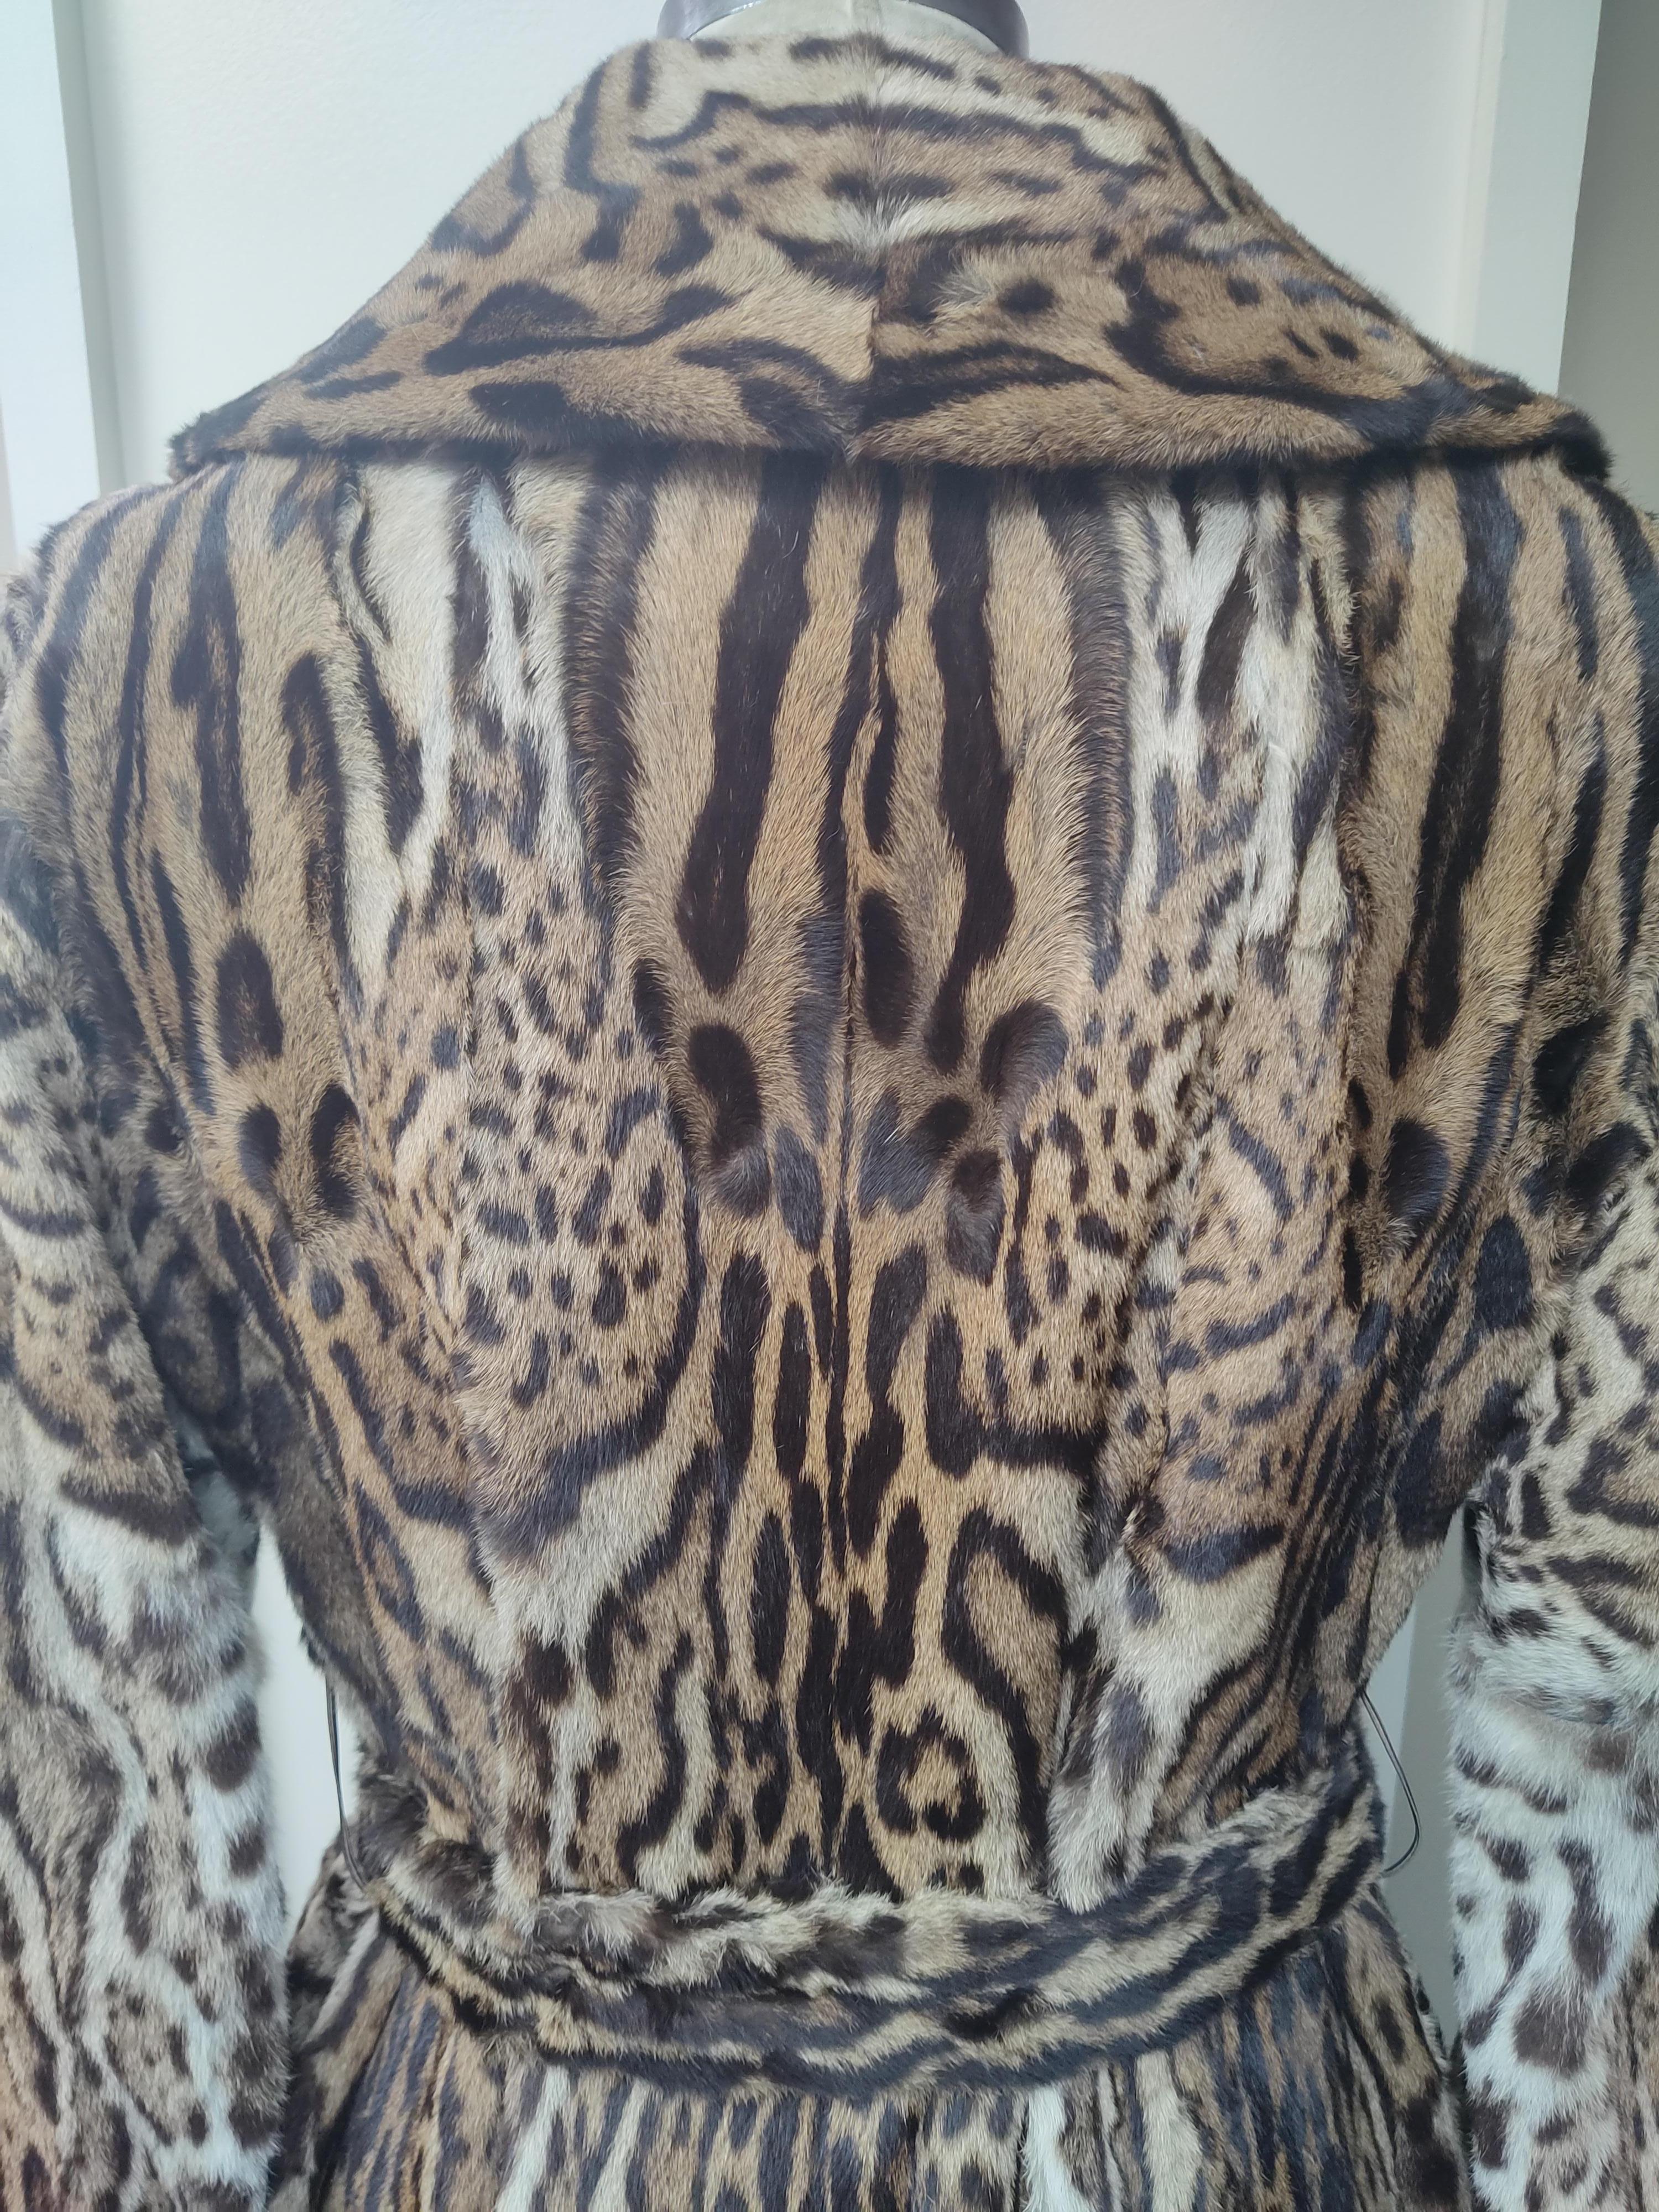 PRODUCT DESCRIPTION:

Brand new luxurious Christian Dior Ocelot fur coat 

Condition: Brand New

Closure: Buttons decoration 
Belt: buckled belt with 